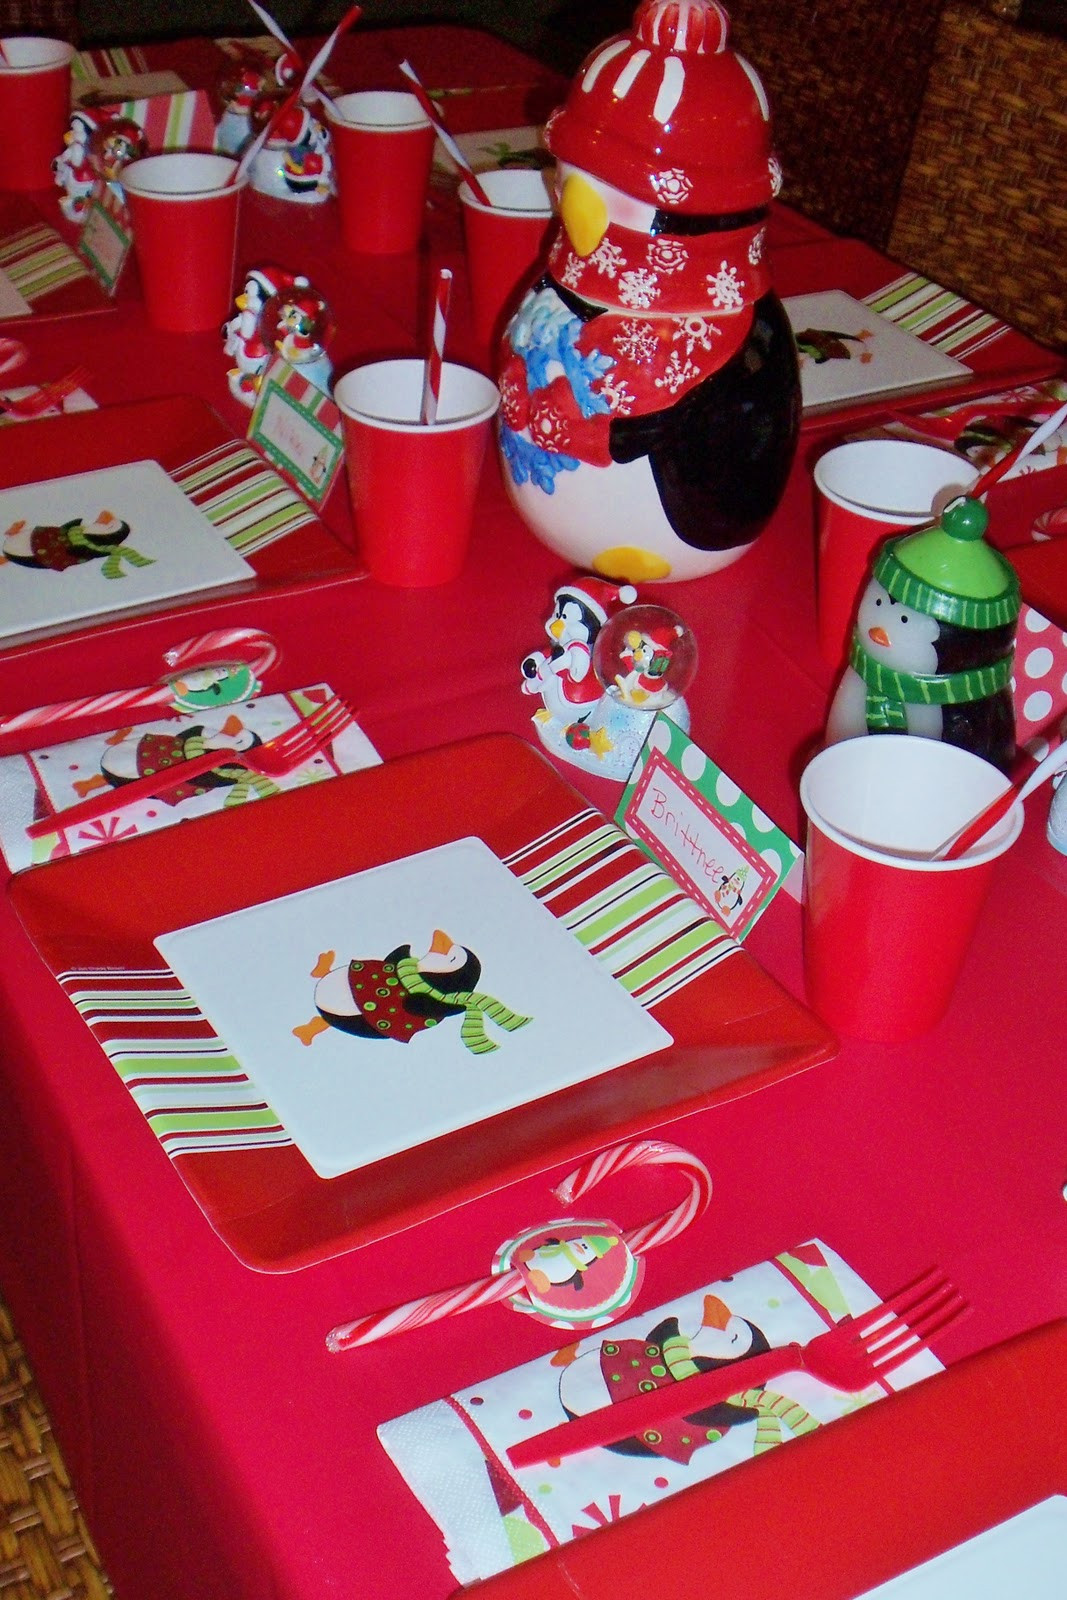 Girl Scout Christmas Party Ideas
 HUNTINGTON BEACH GIRL SCOUT TROOP 746 CHRISTMAS PENGUIN PARTY